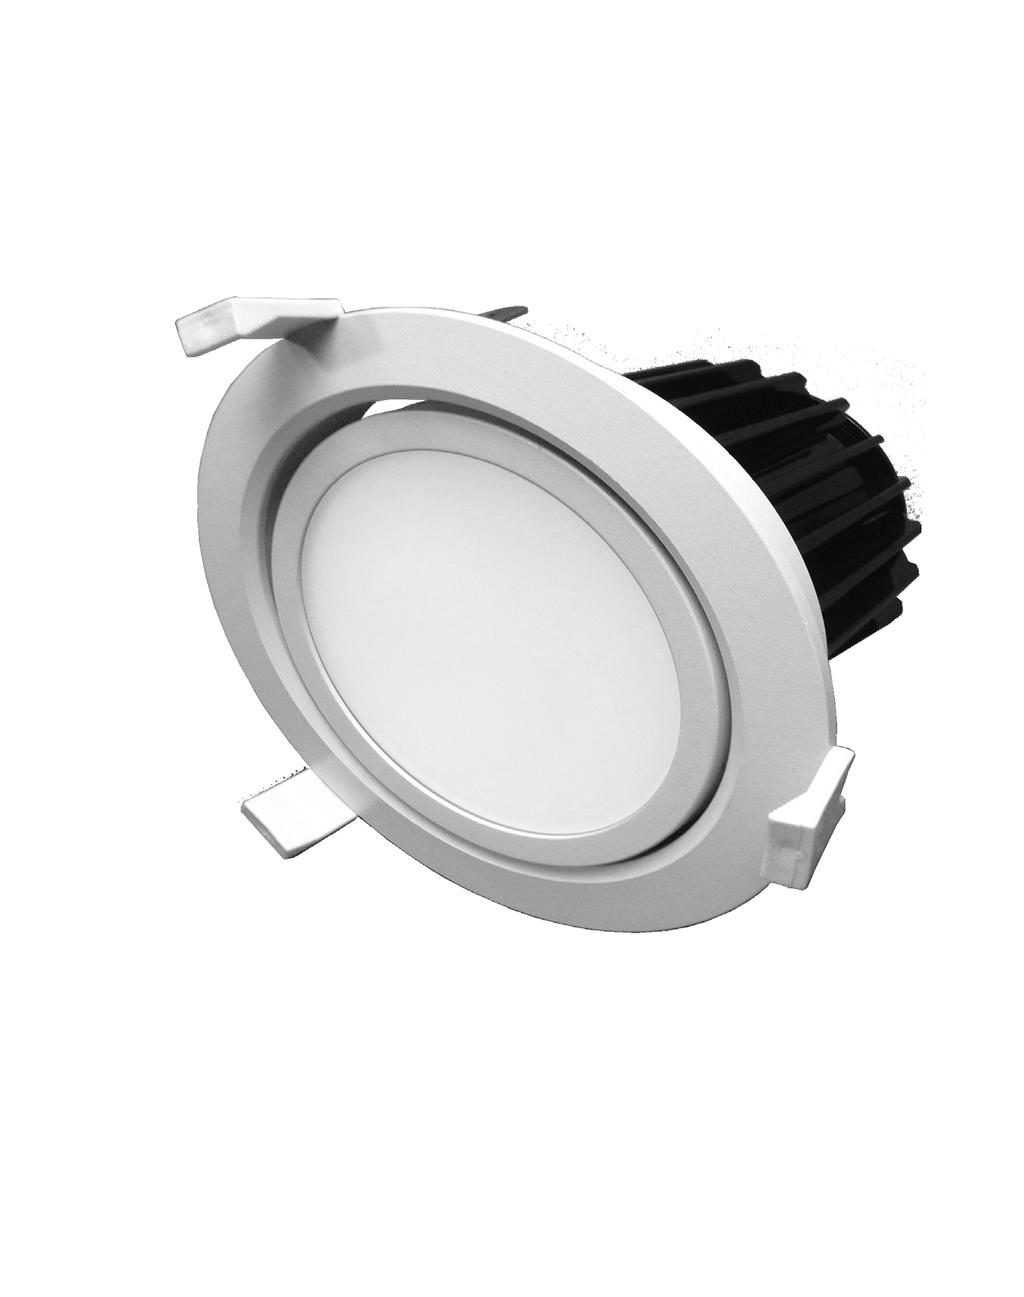 4, 5 & 6 DOWNLIGHT WITH ADJUSTABLE GIMBLE EPISTAR IP20 >85 L70 85-265VAC BEAM ANGLE RATING CRI 35,000 HRS DIMENSIONS DIAMETER DEPTH CUT OUT RANGE 4 105MM 102MM 88-98MM 5 176MM 125MM 109-127MM 6 187MM